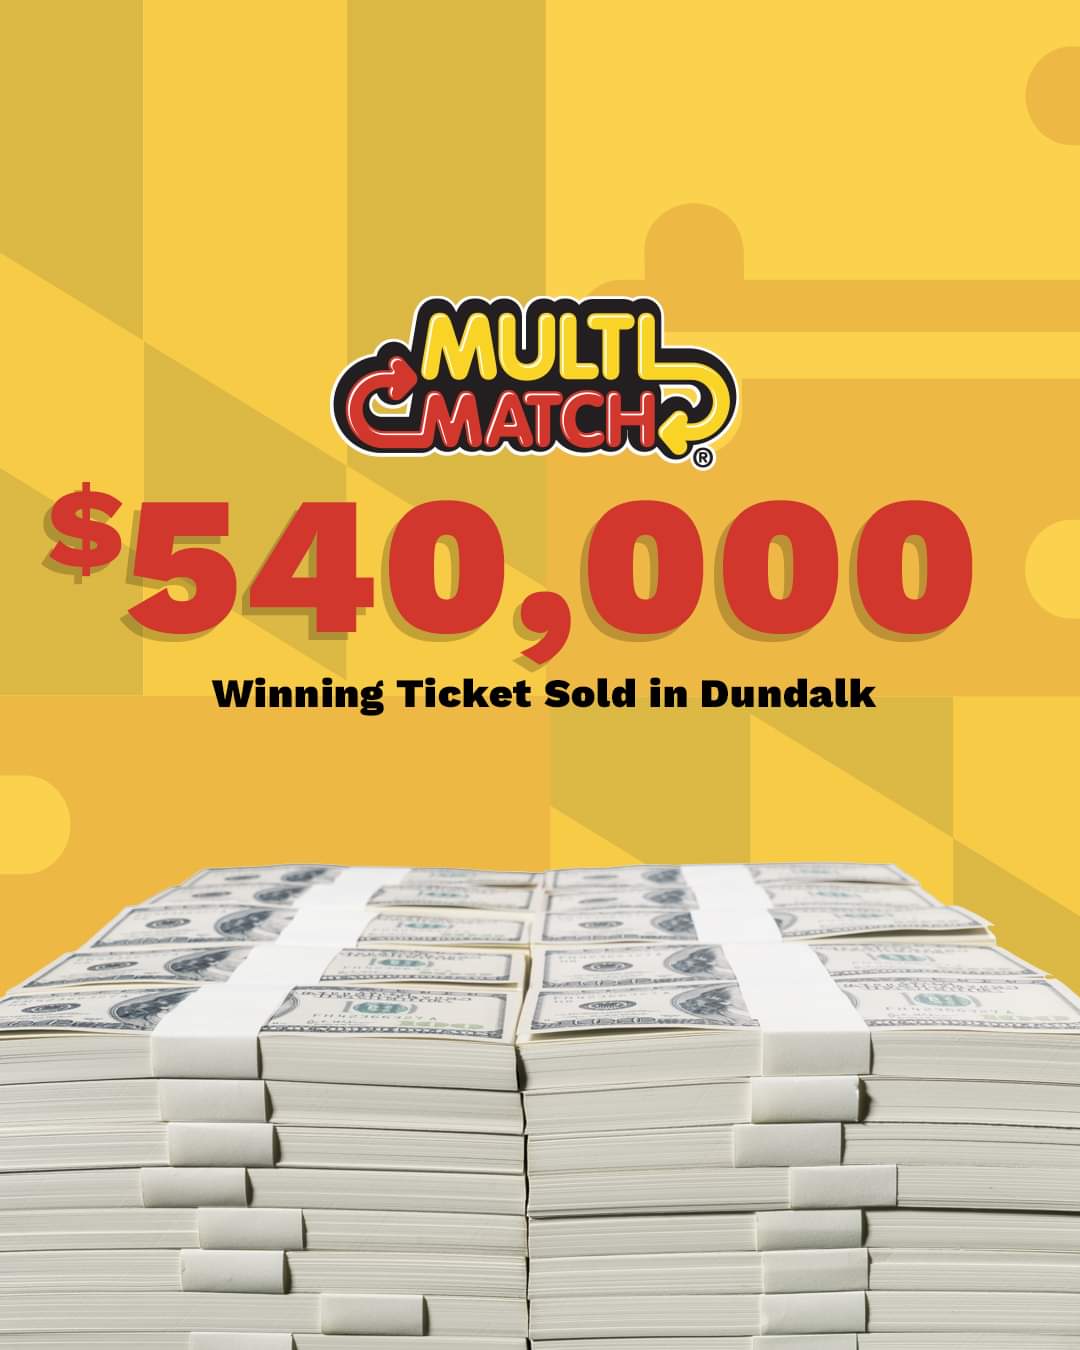 A $540,000 Winning Ticket Sold in Dundalk